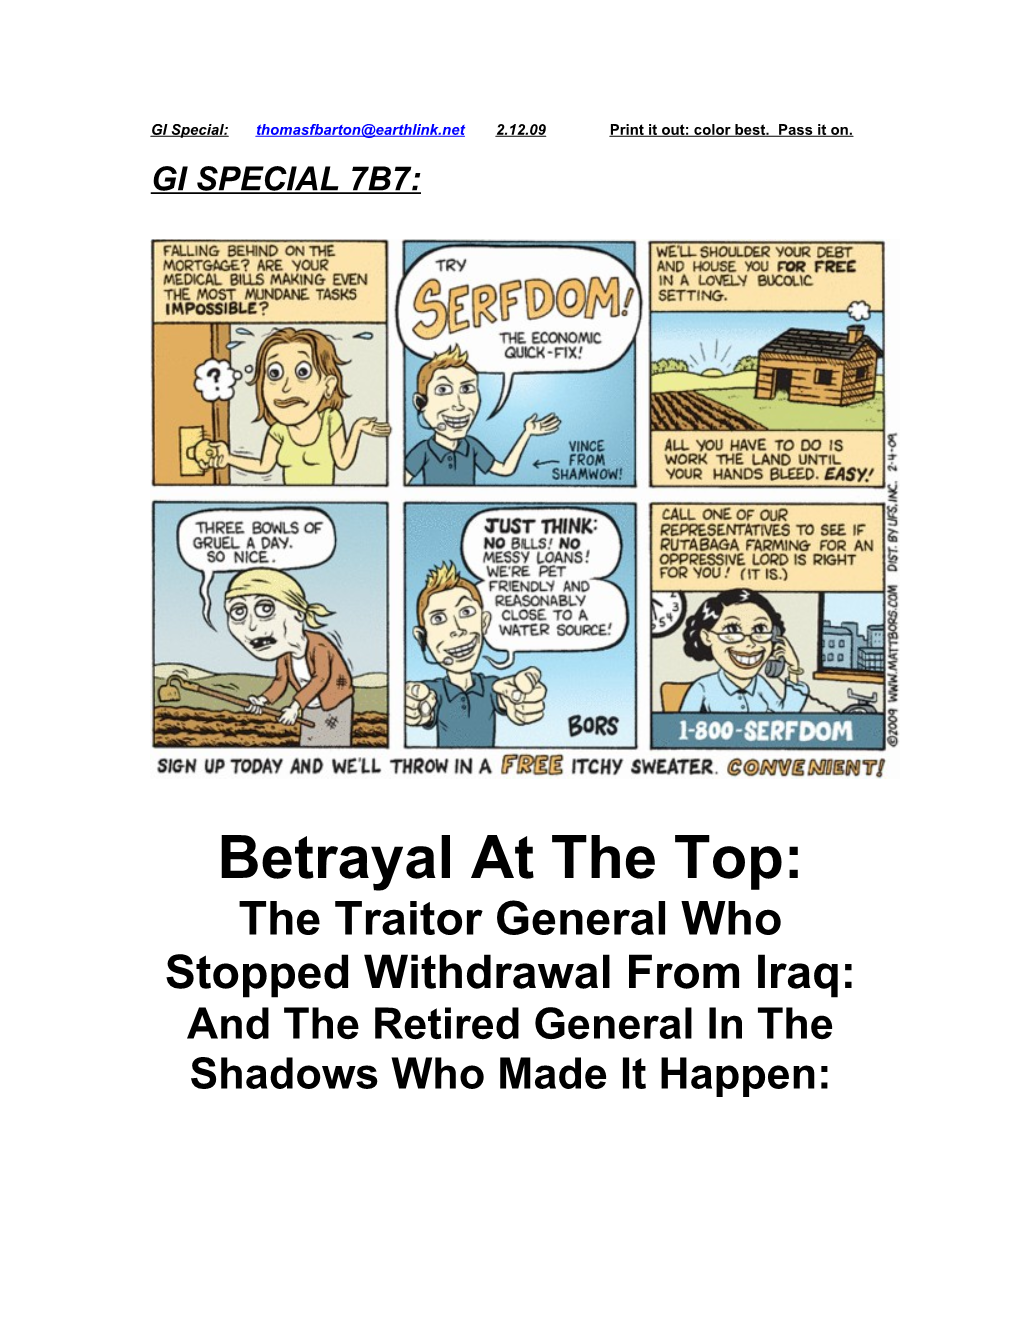 The Traitor General Who Stopped Withdrawal from Iraq